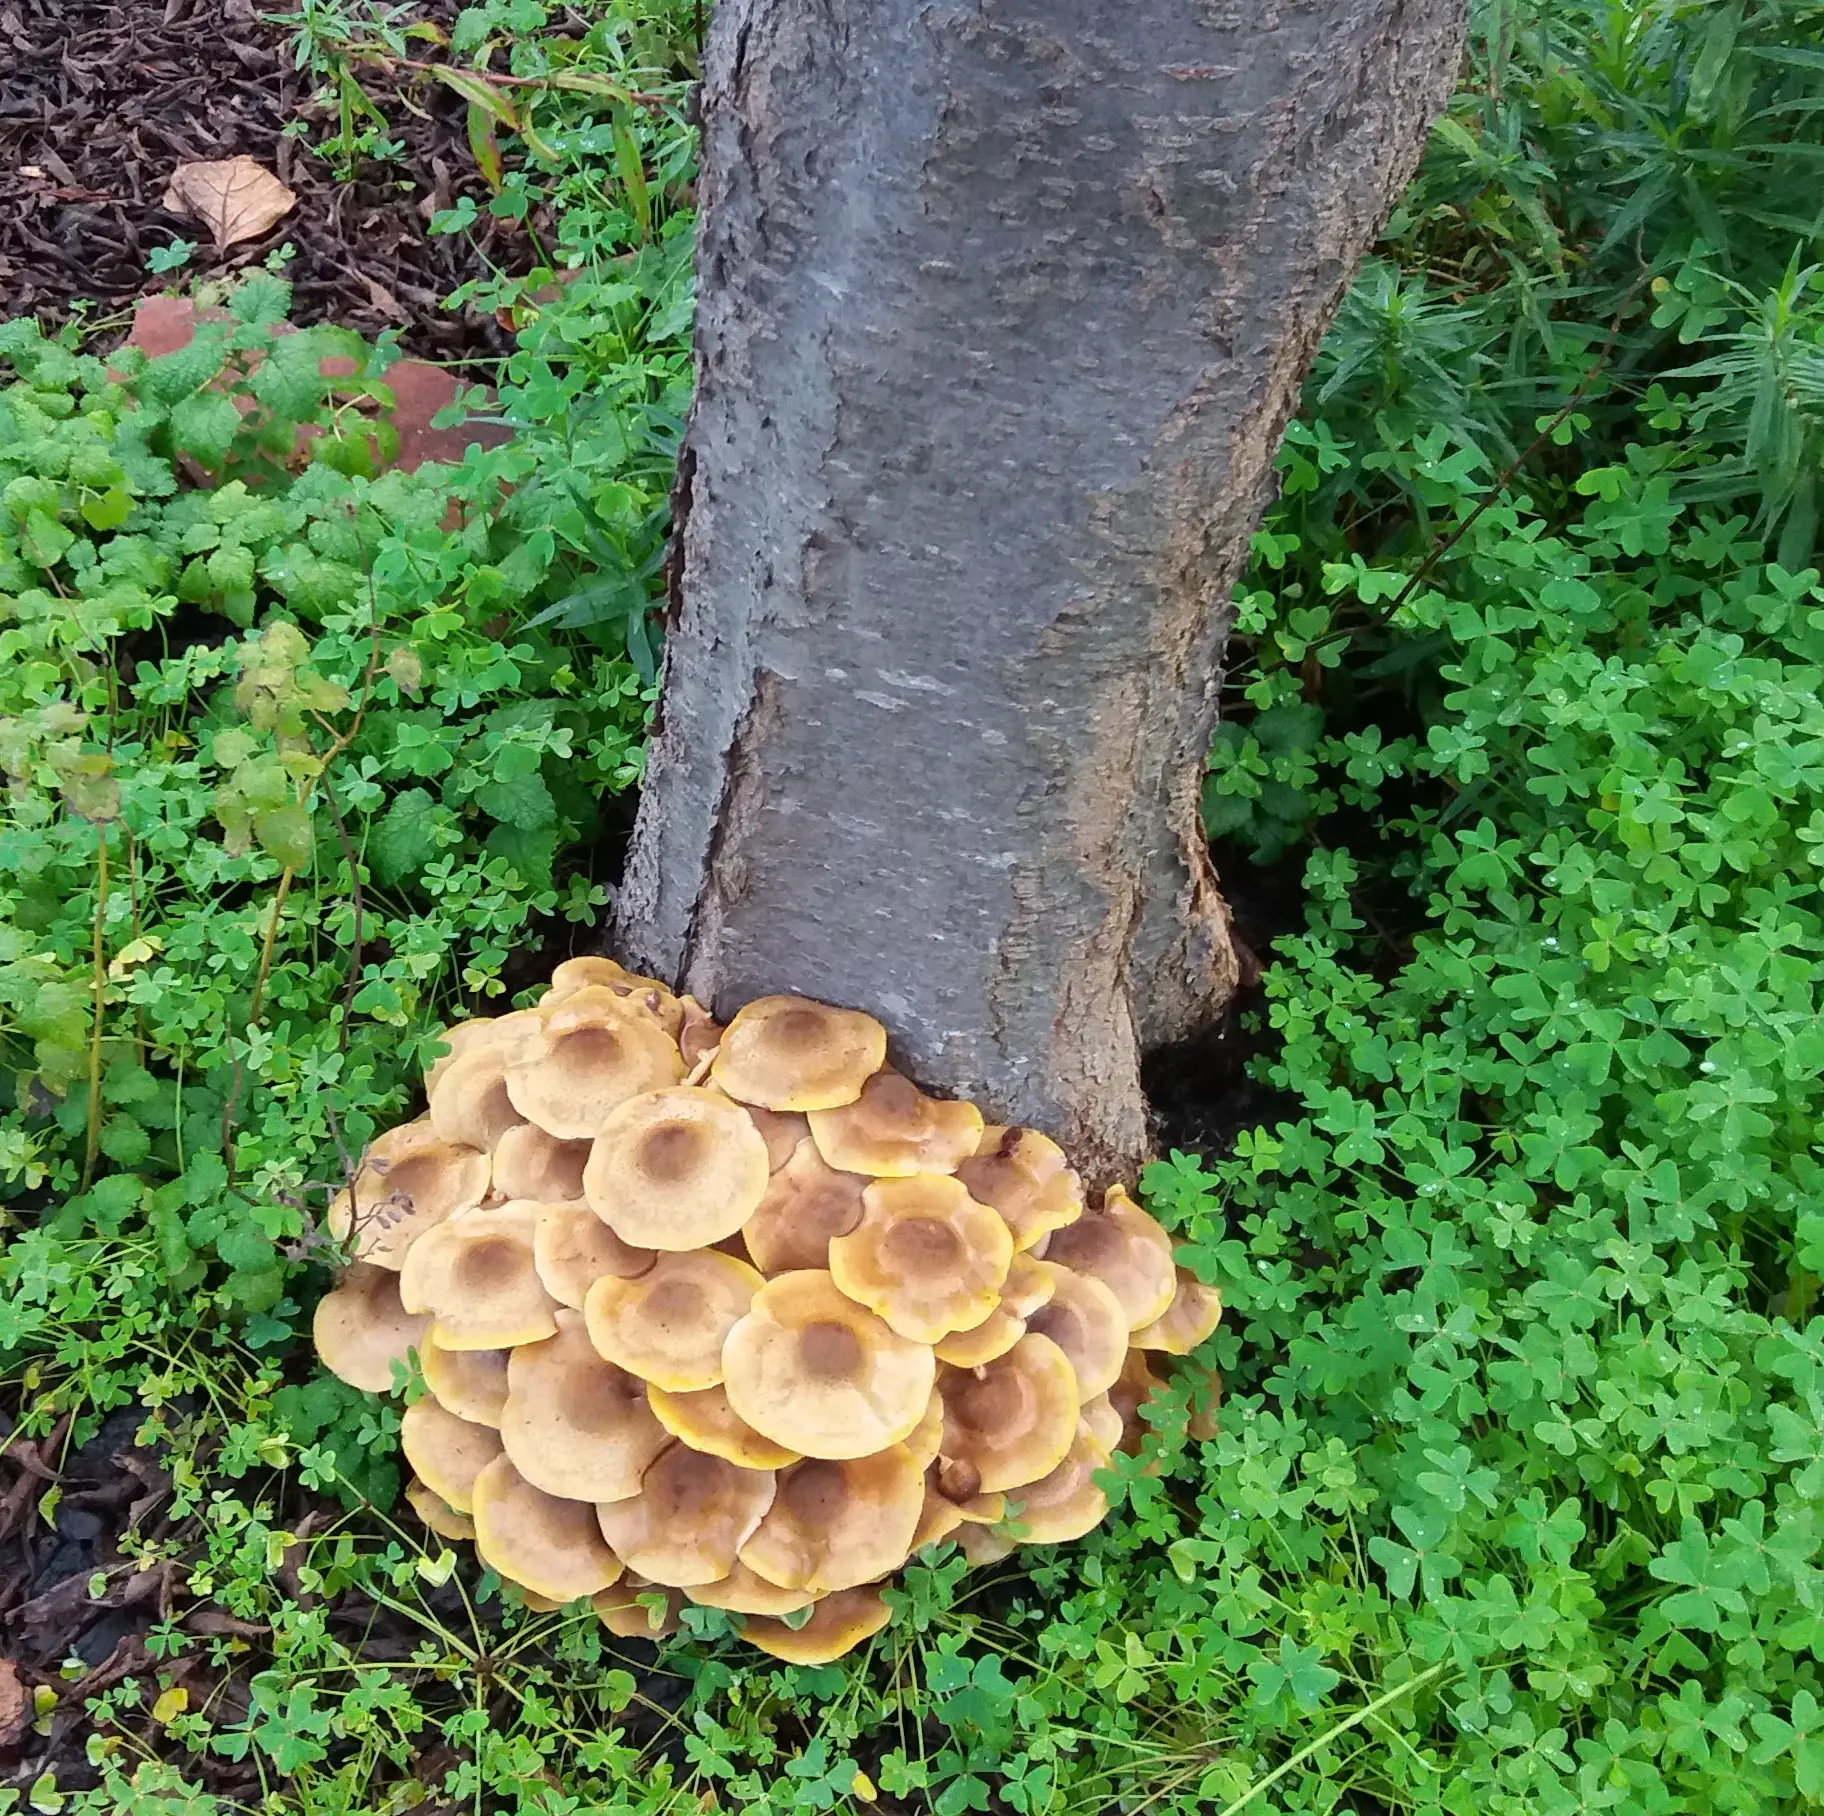 âTis the Season for Oak Root Fungus to Strike